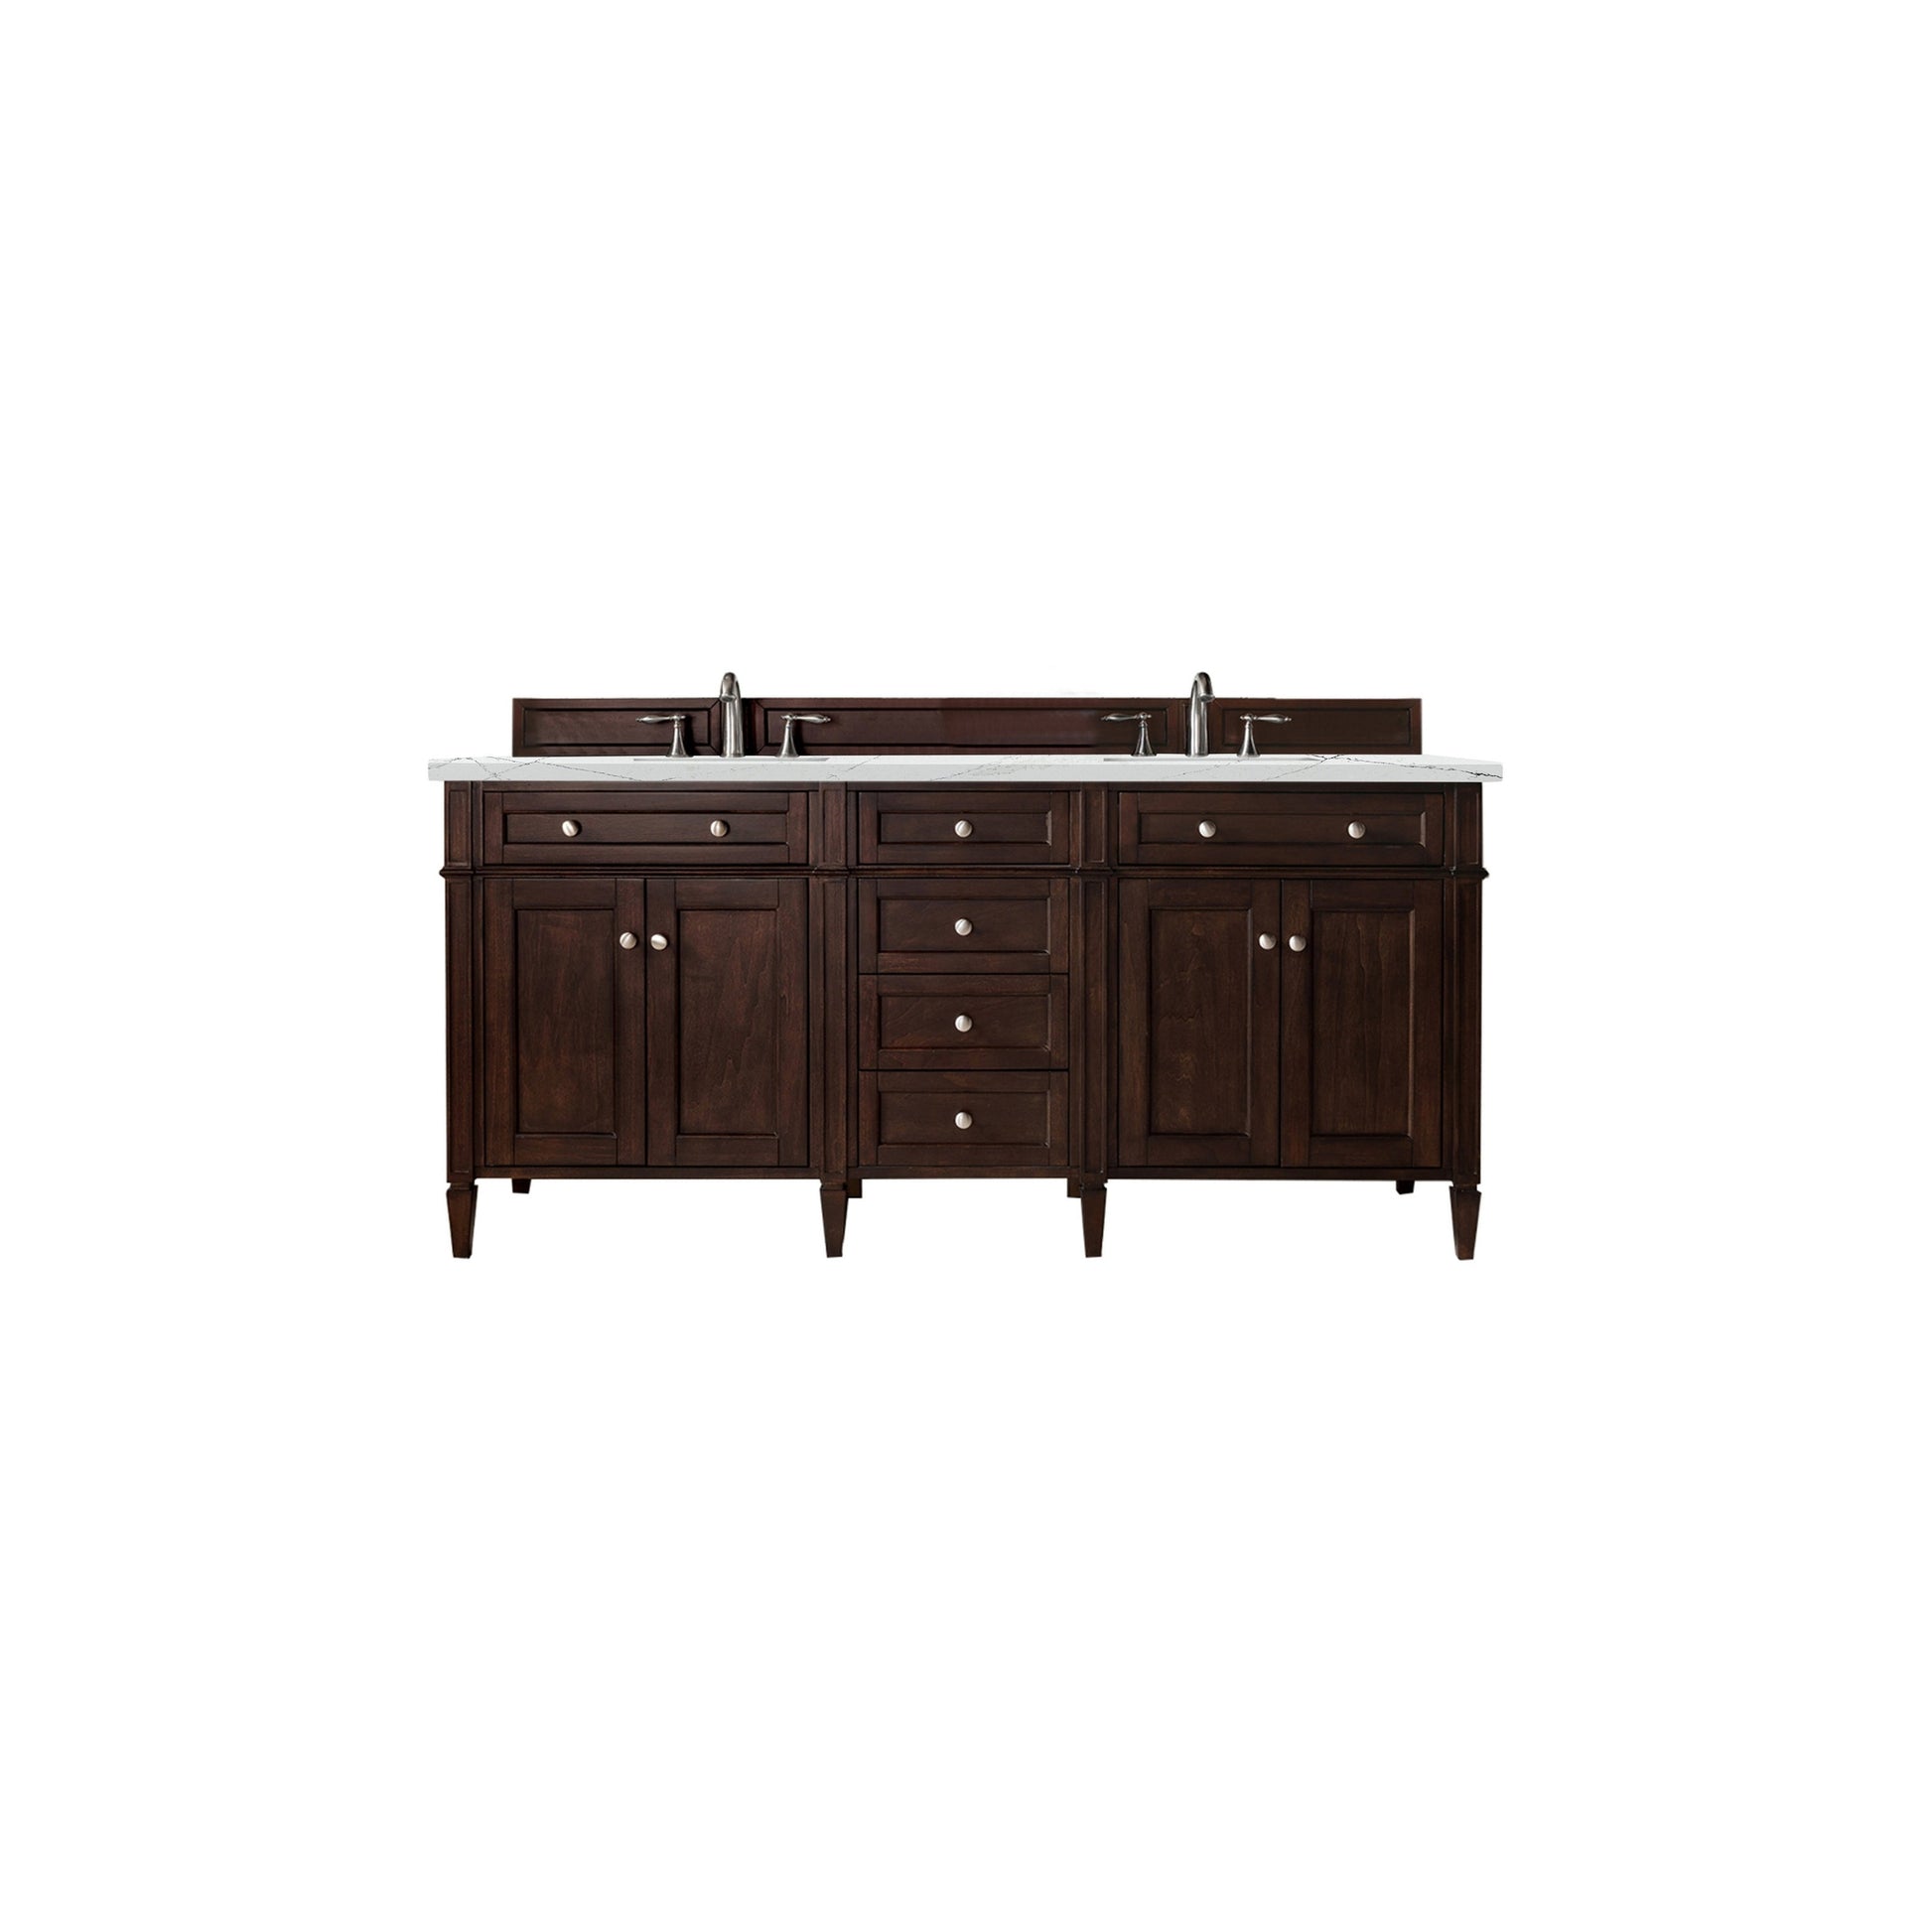 James Martin Vanities Brittany 72" Burnished Mahogany Double Vanity With 3cm Ethereal Noctis Quartz Top